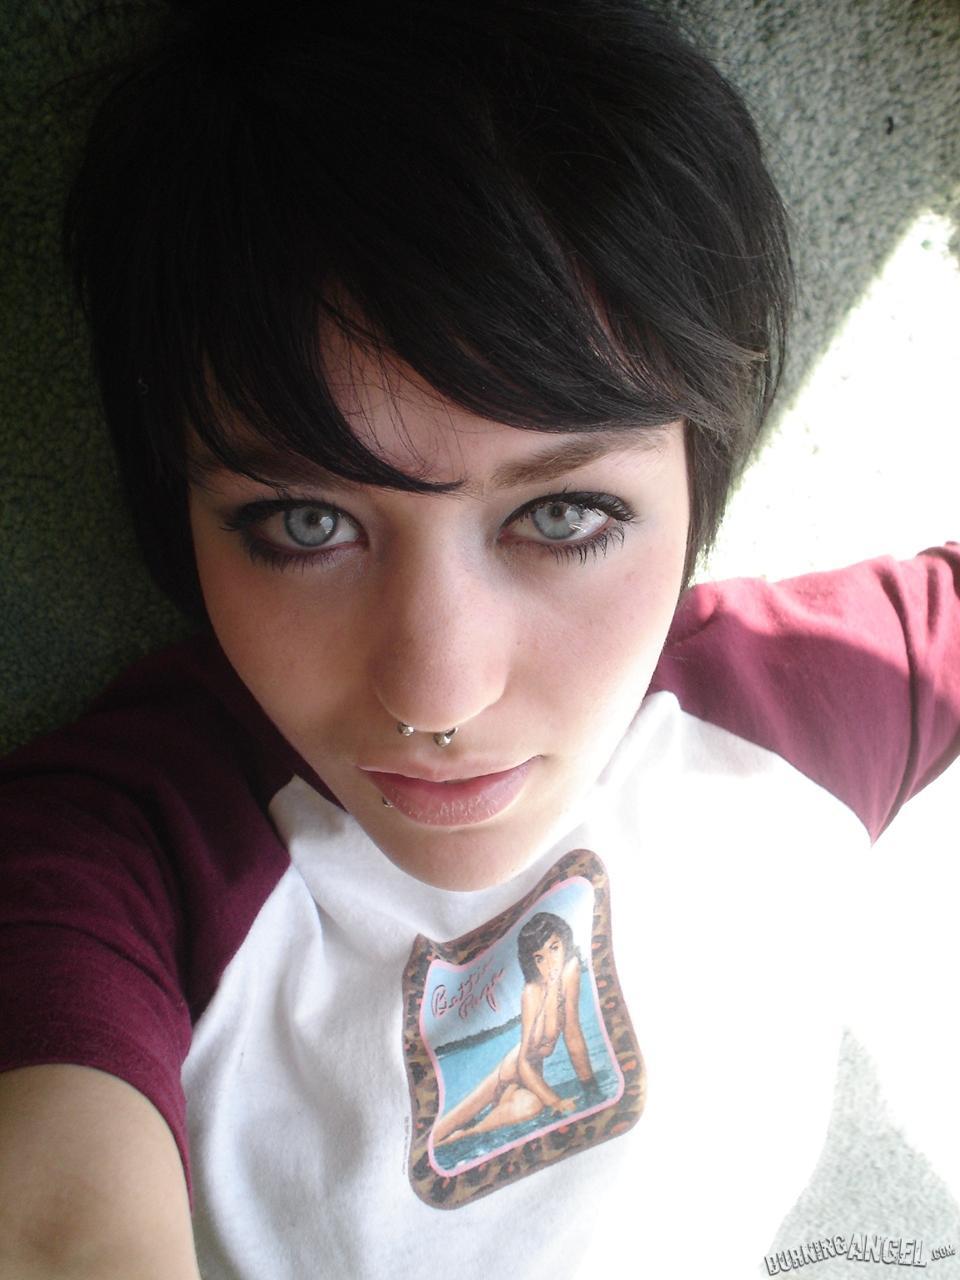 Short-haired punk chick with pierced nose, lip, navel in her own photos(4)